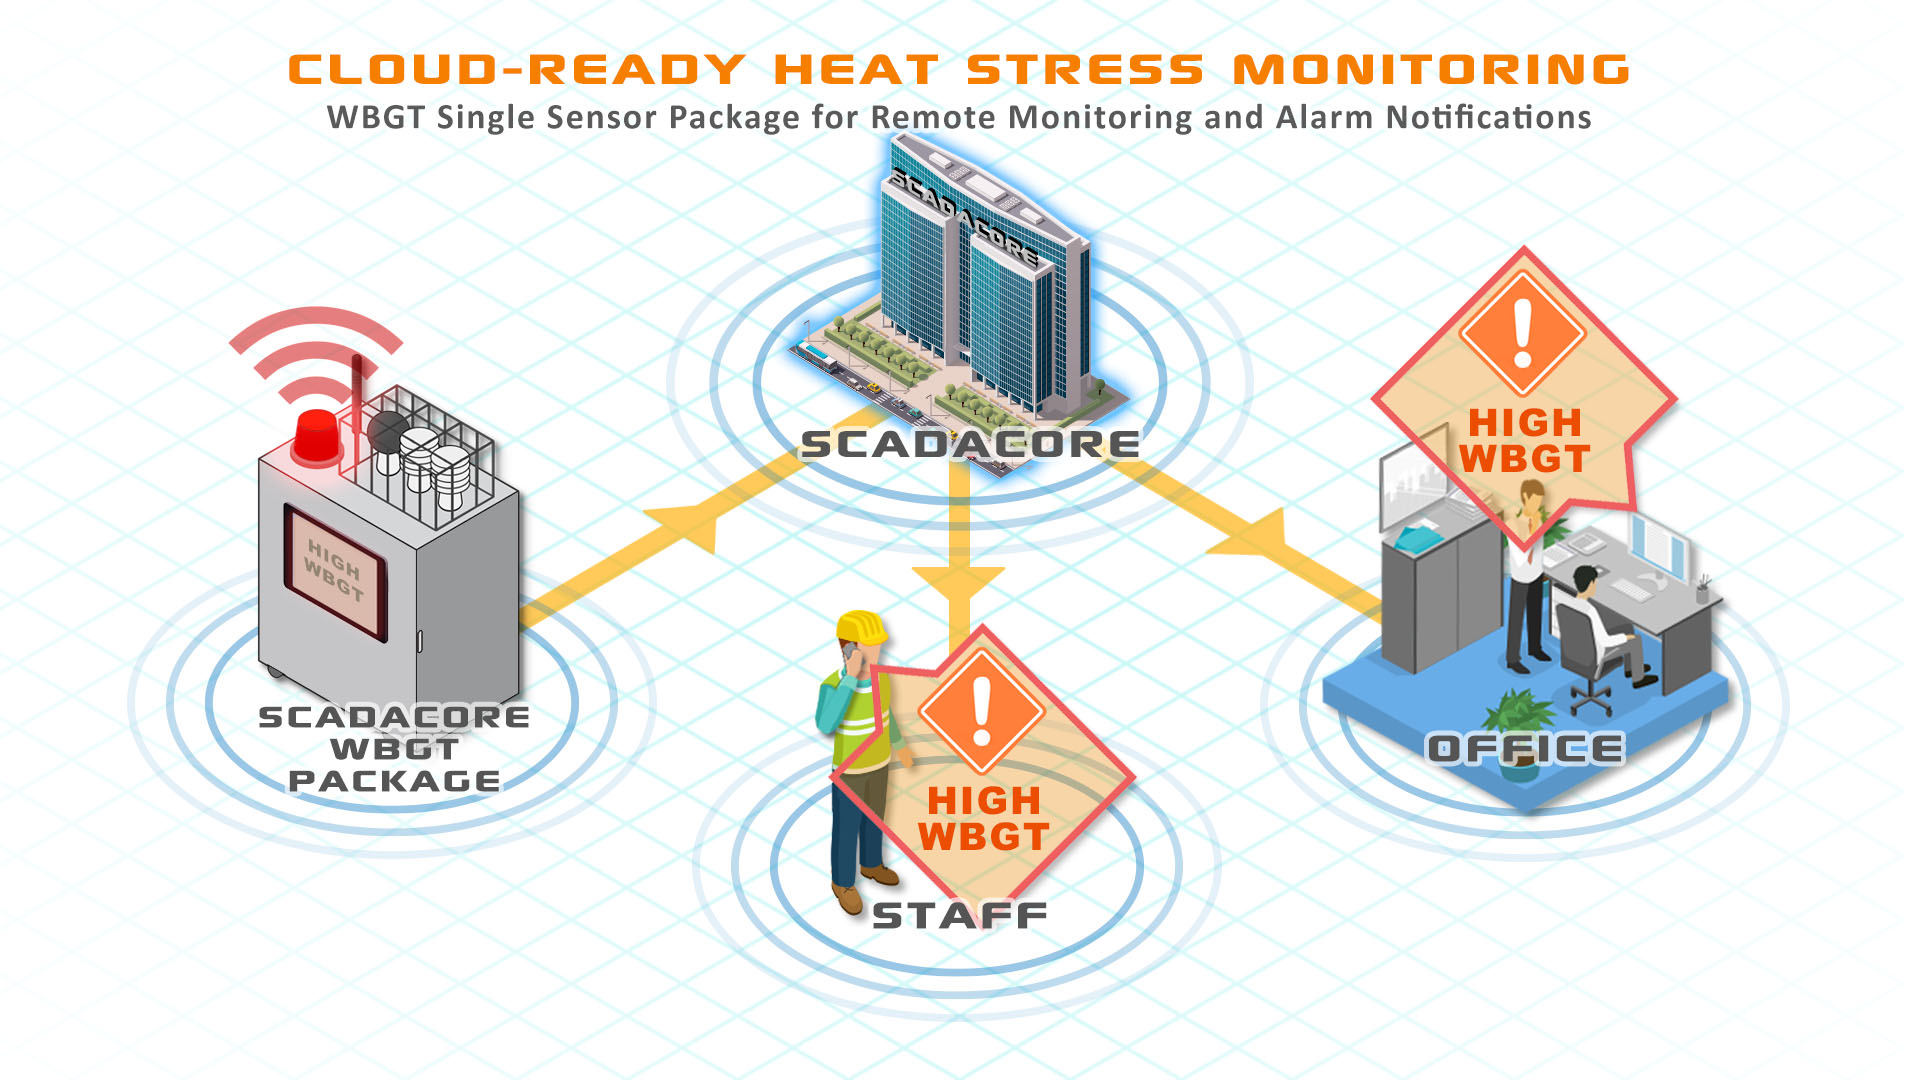 Cloud-Ready WBGT Heat Stress Monitoring for HSE, Manufacturing, and Military